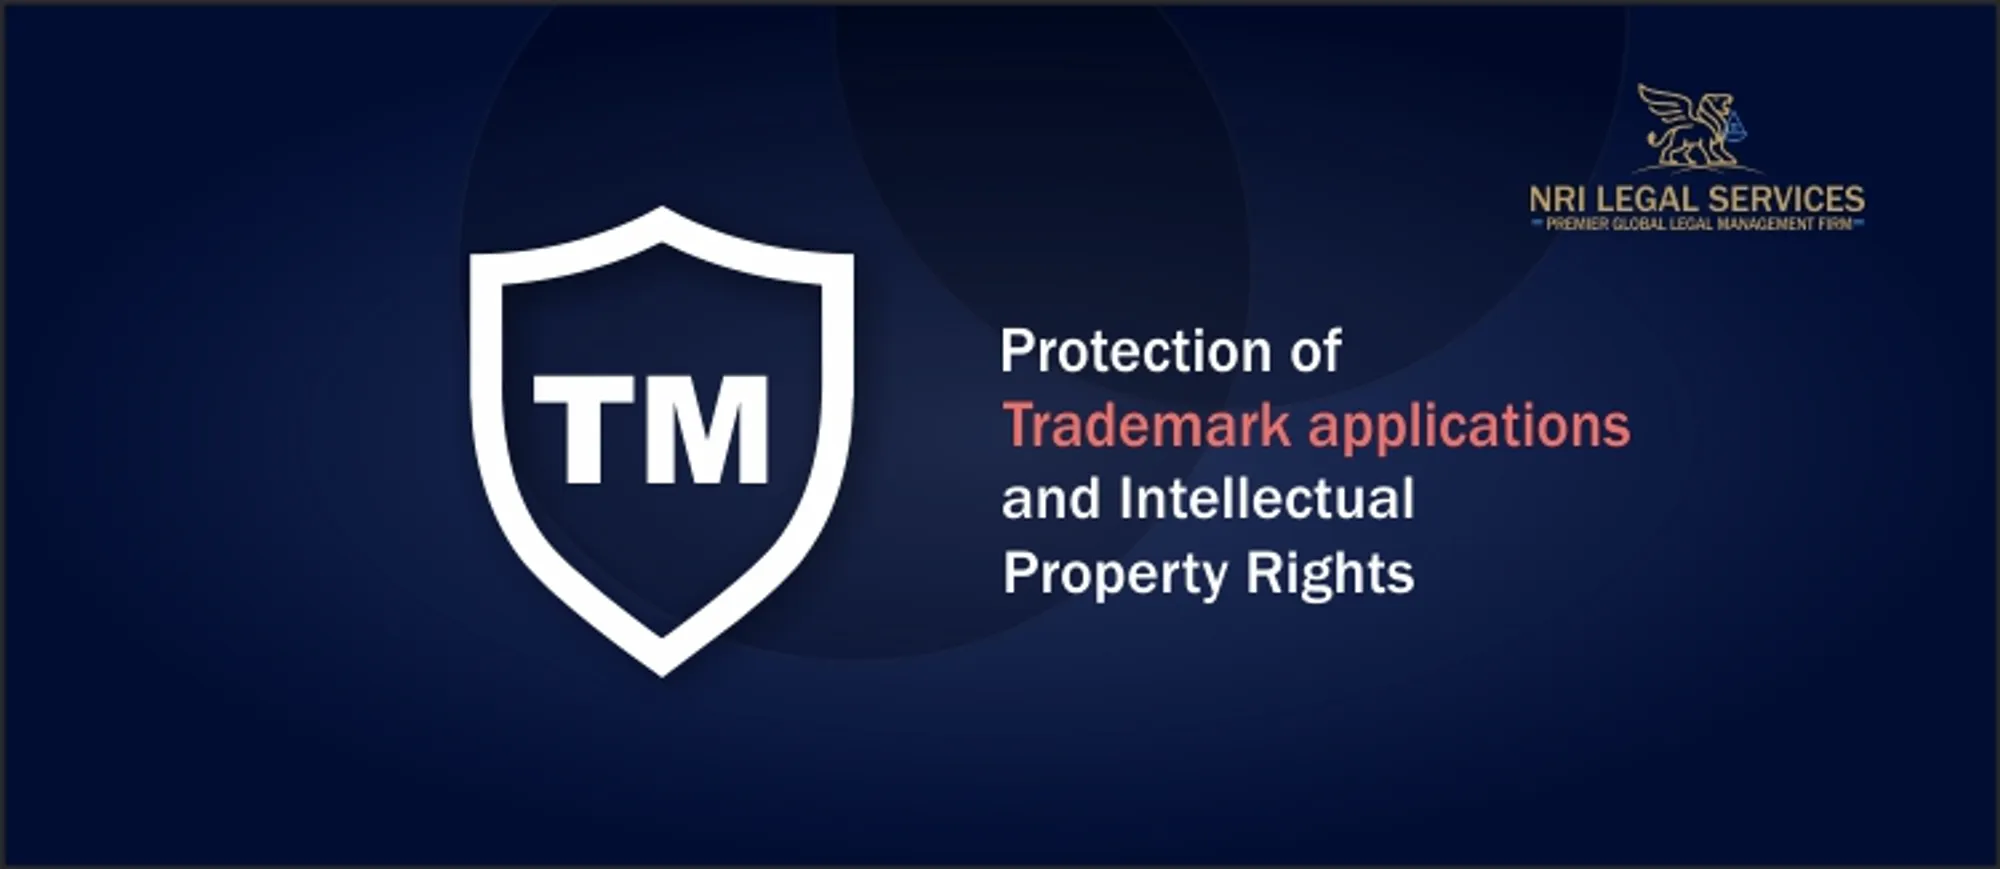 Protection of Trademark applications and Intellectual Property Rights